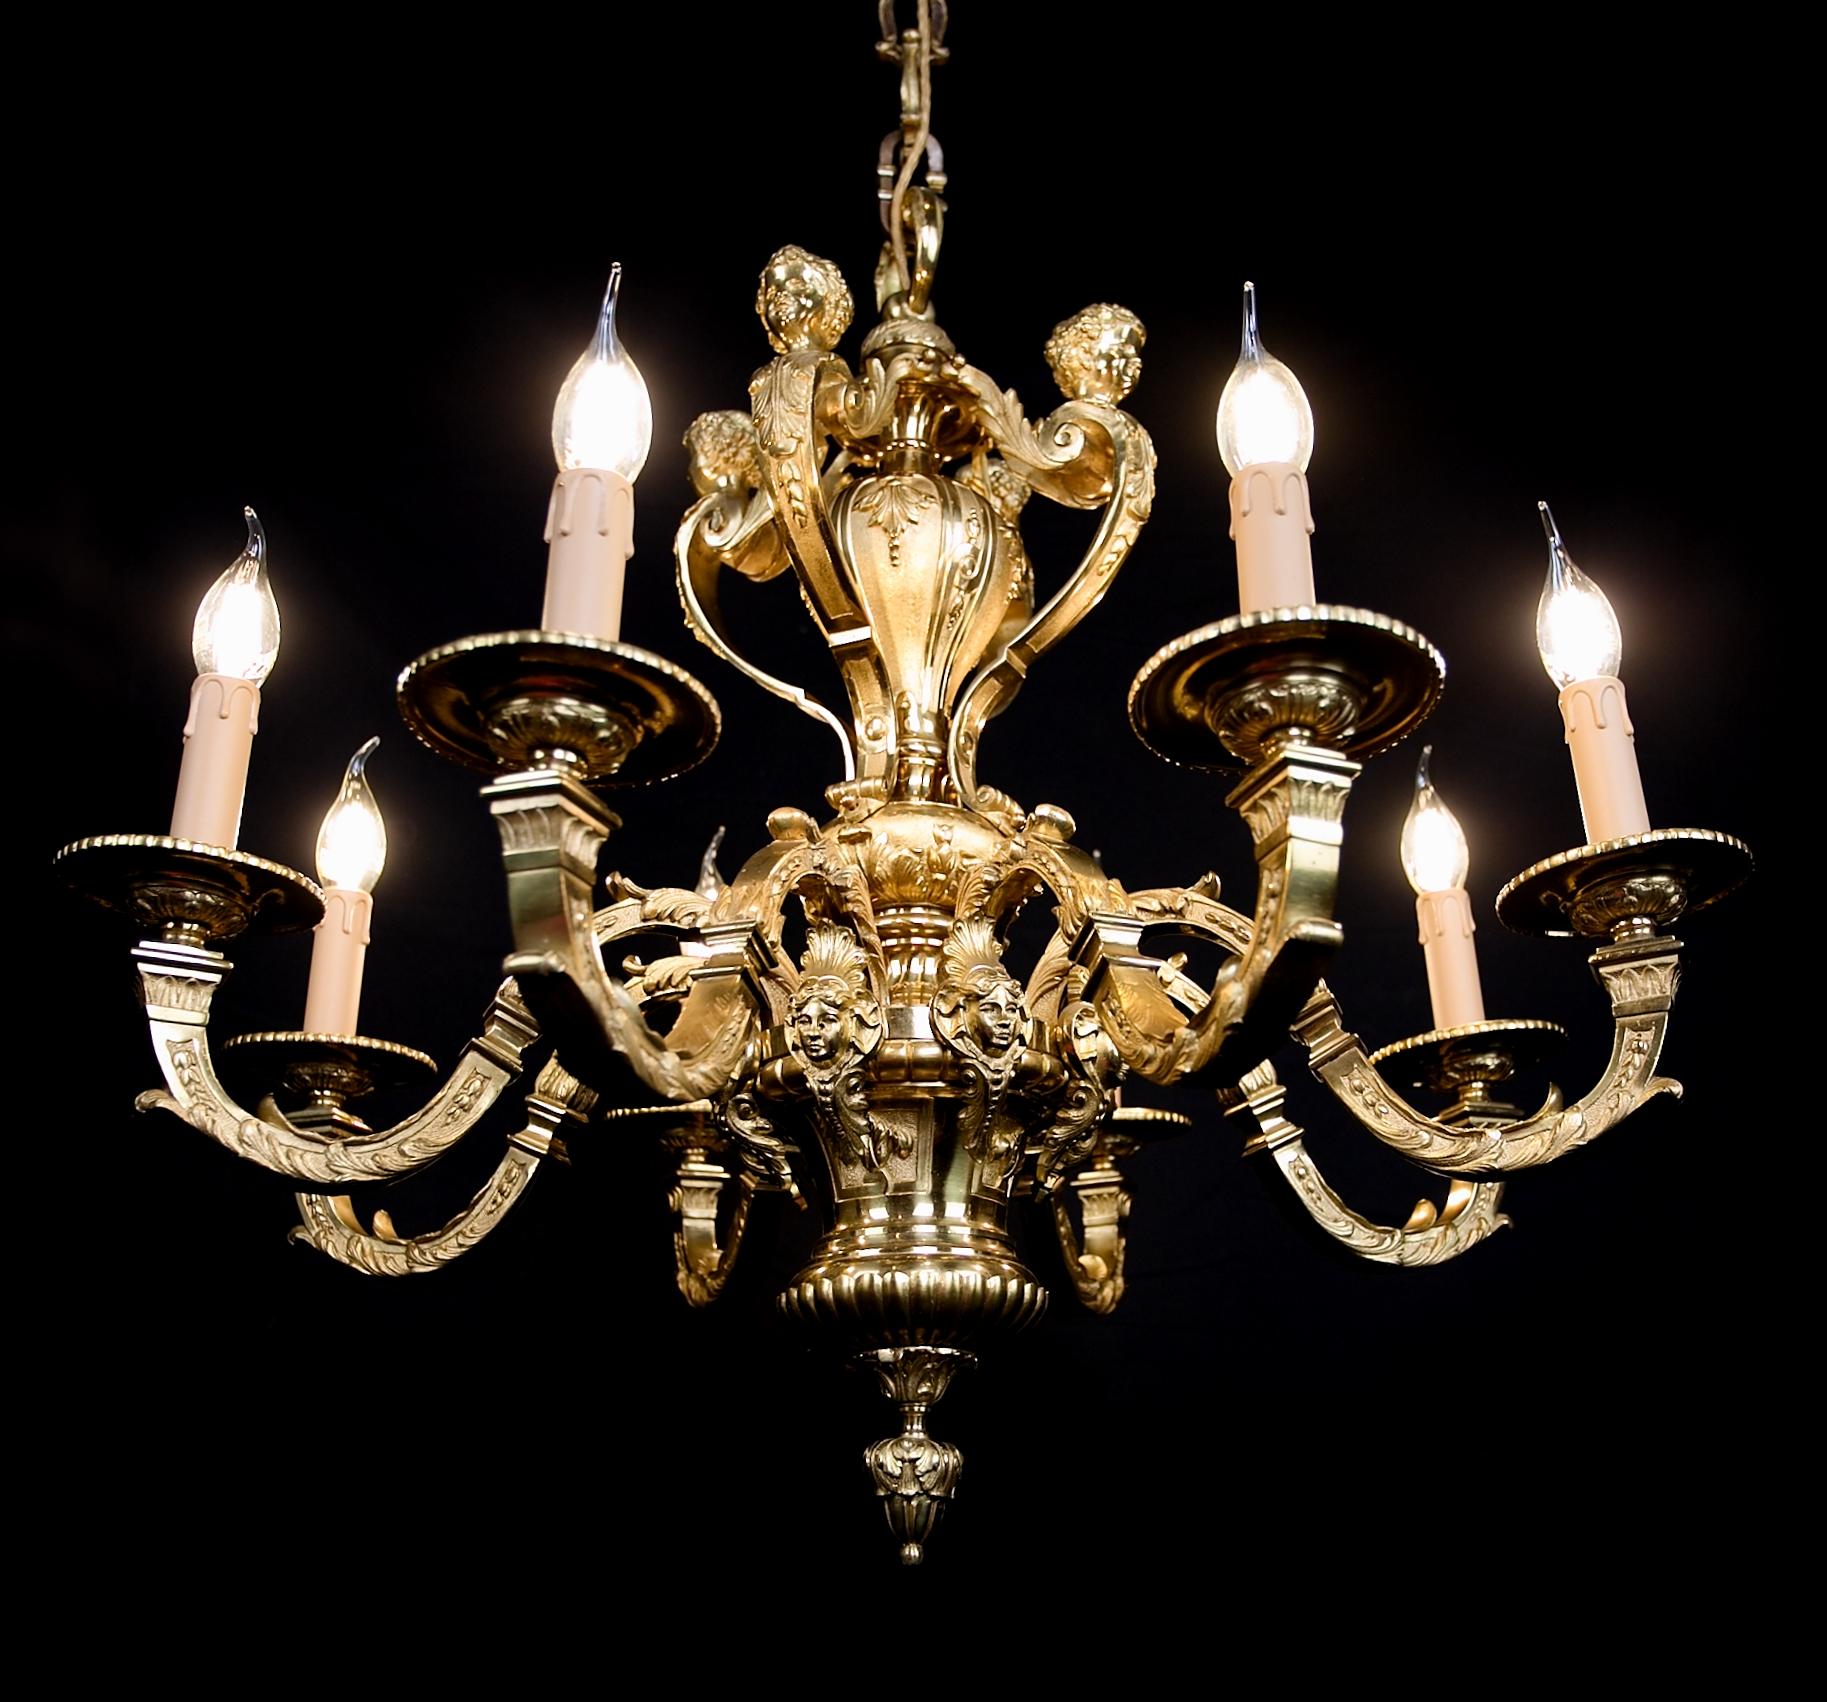 Antique French Mazarin Bronze Chandelier

A heavy eight-armed bronze chandelier in the style of Louis XIV. The upper part decorated with cherub heads on an acanthus leaf and the lower part with caryatid heads. Elaborated in detail. The chandelier